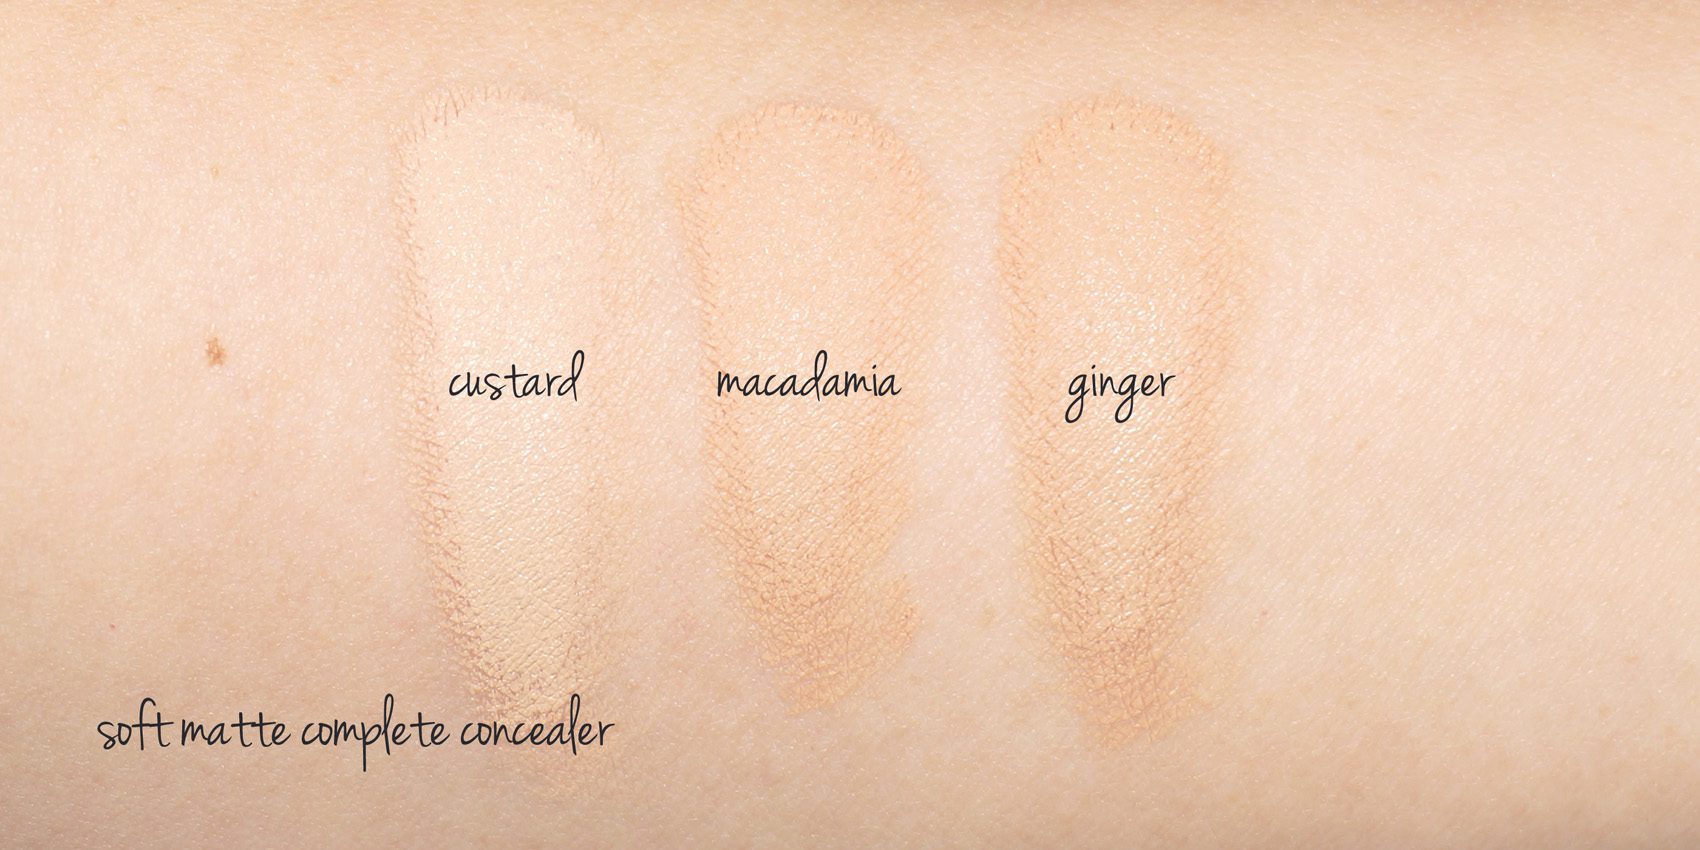 Nars concealer Swatches